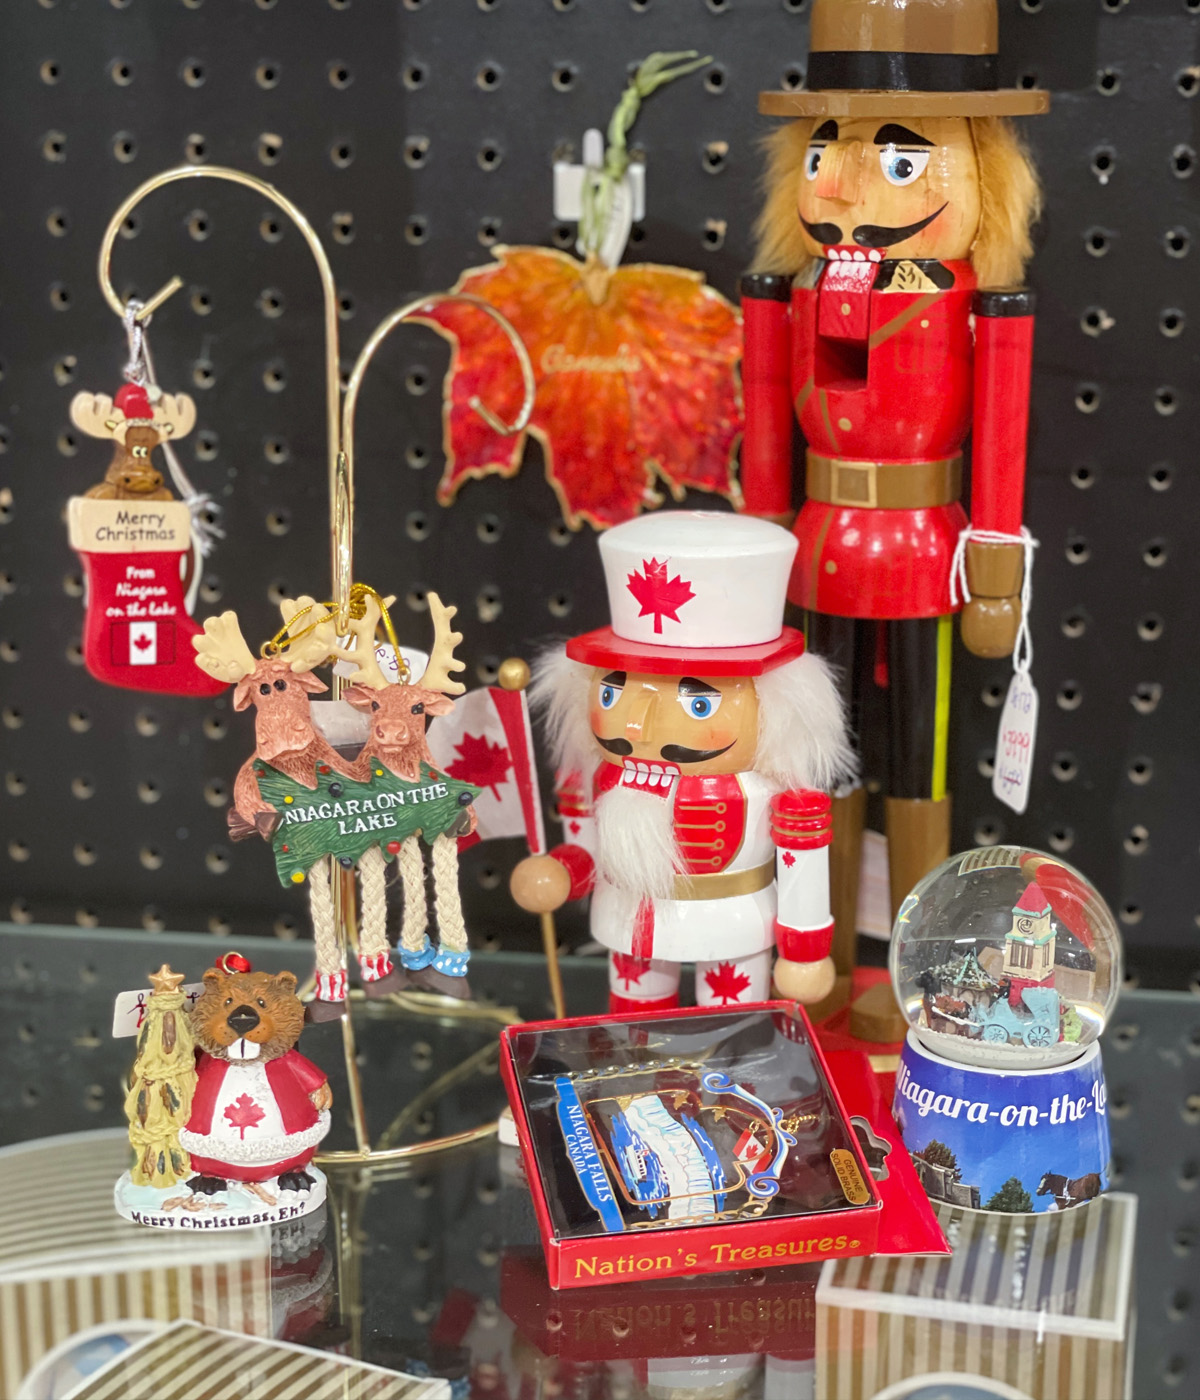 What better way to celebrate Canada, Niagara-on-the-Lake & Niagara Falls than with these ornaments?